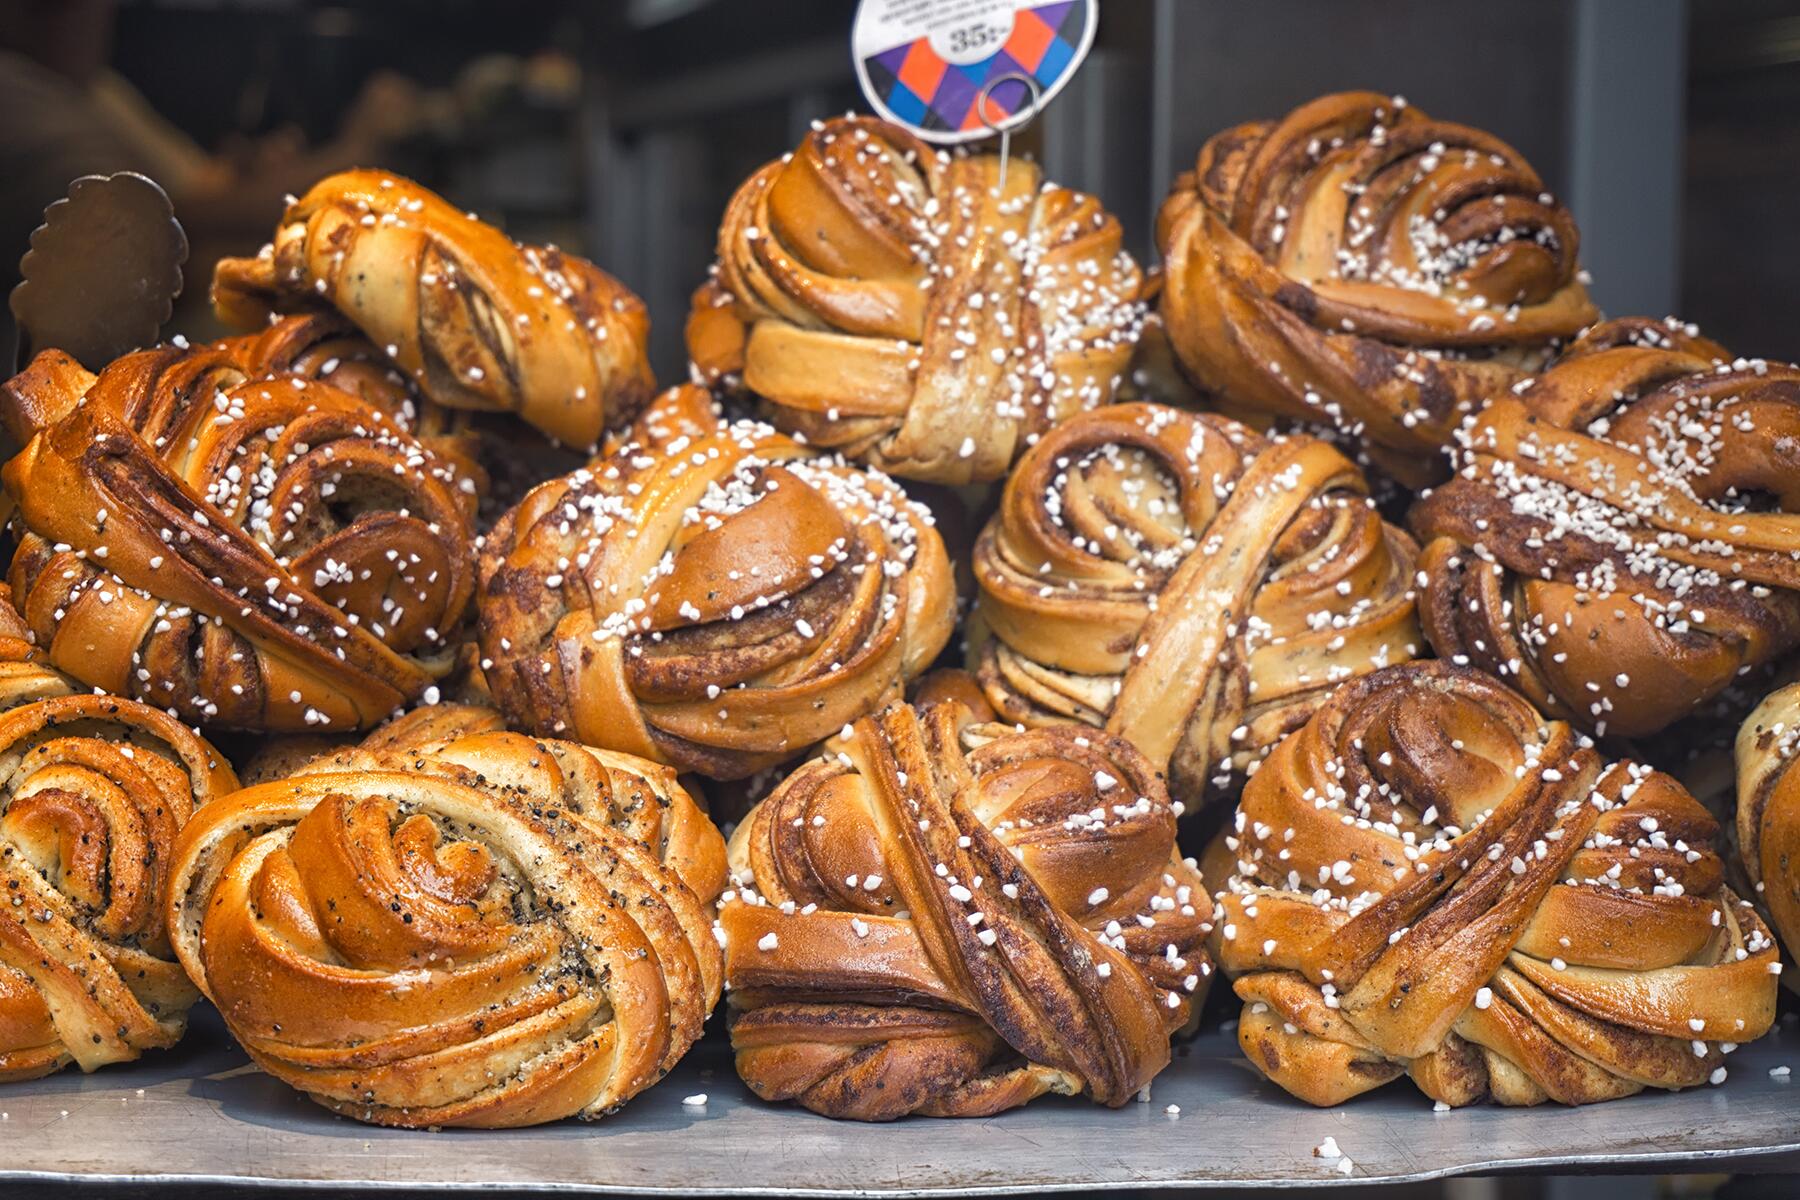 Where is the Best Cinnamon Bun in the World?